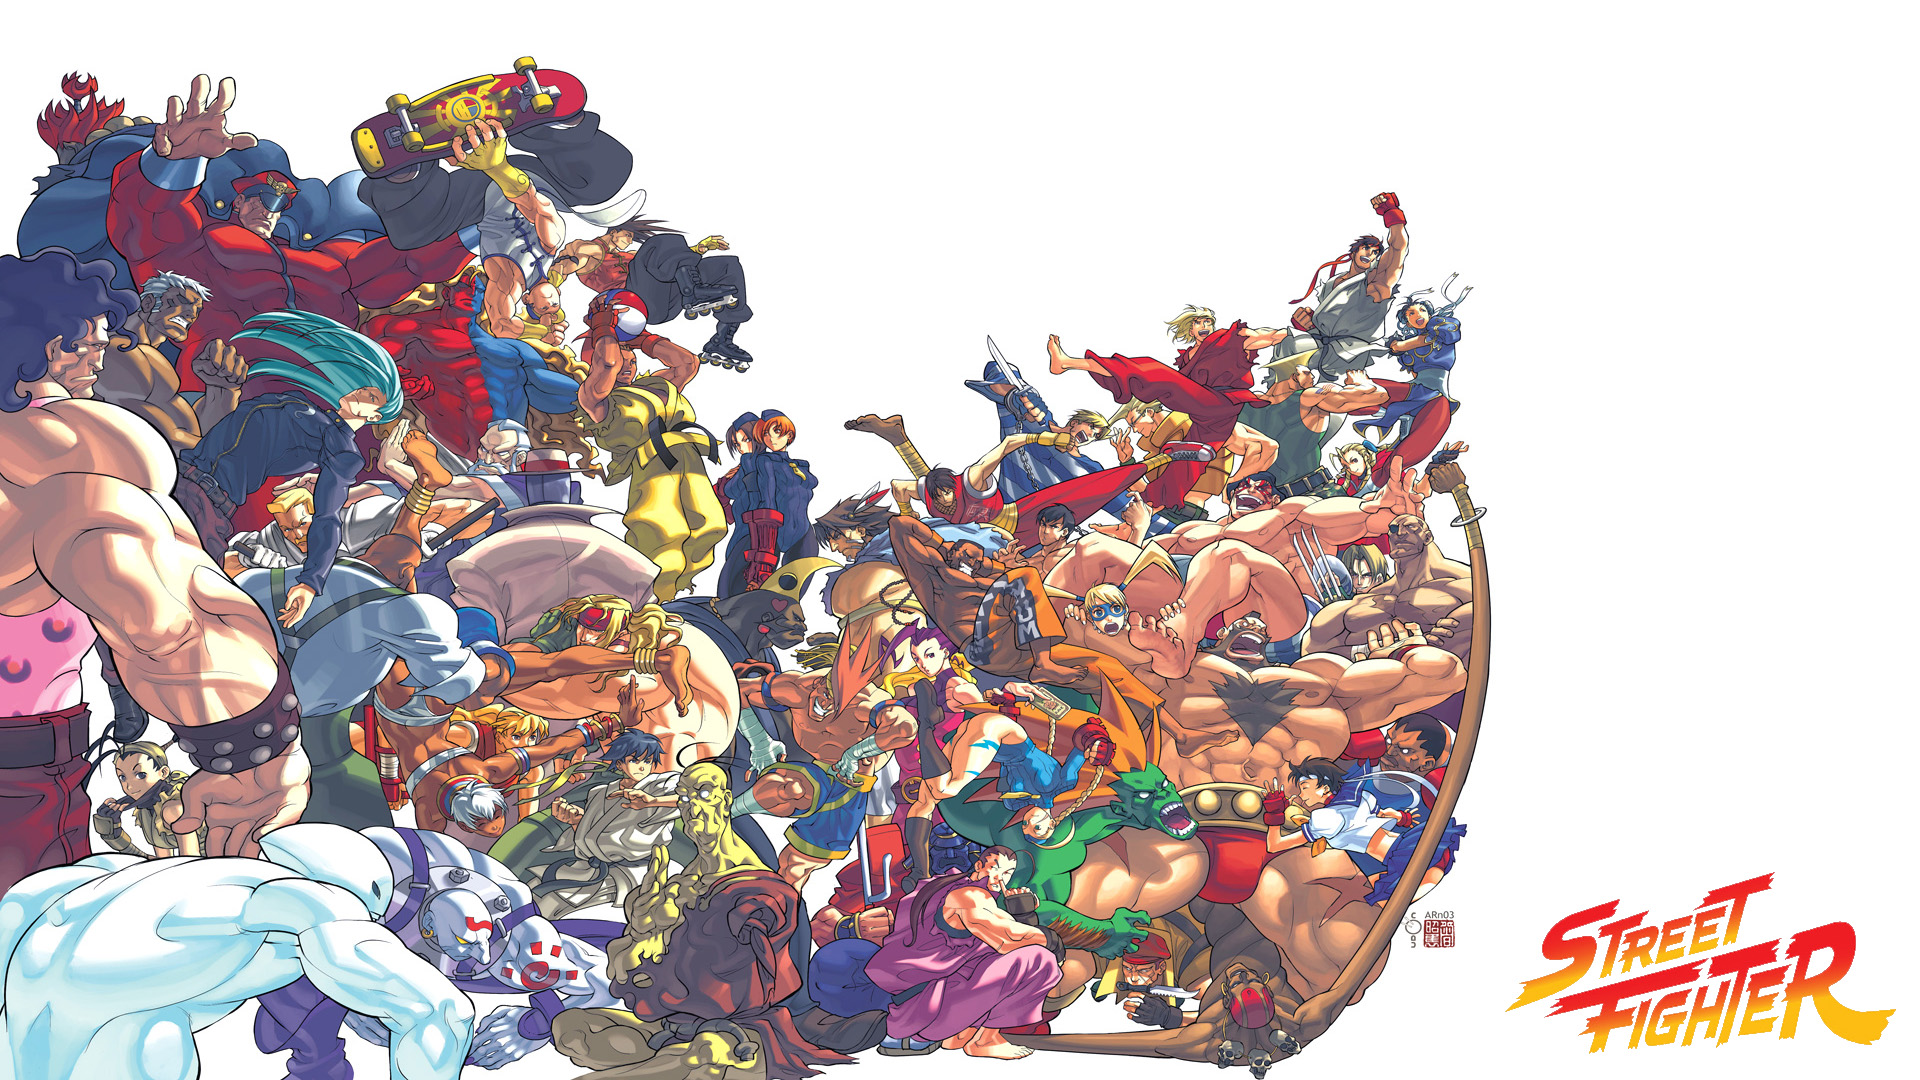 Street Fighter 3. Submitted by MrFresh KC